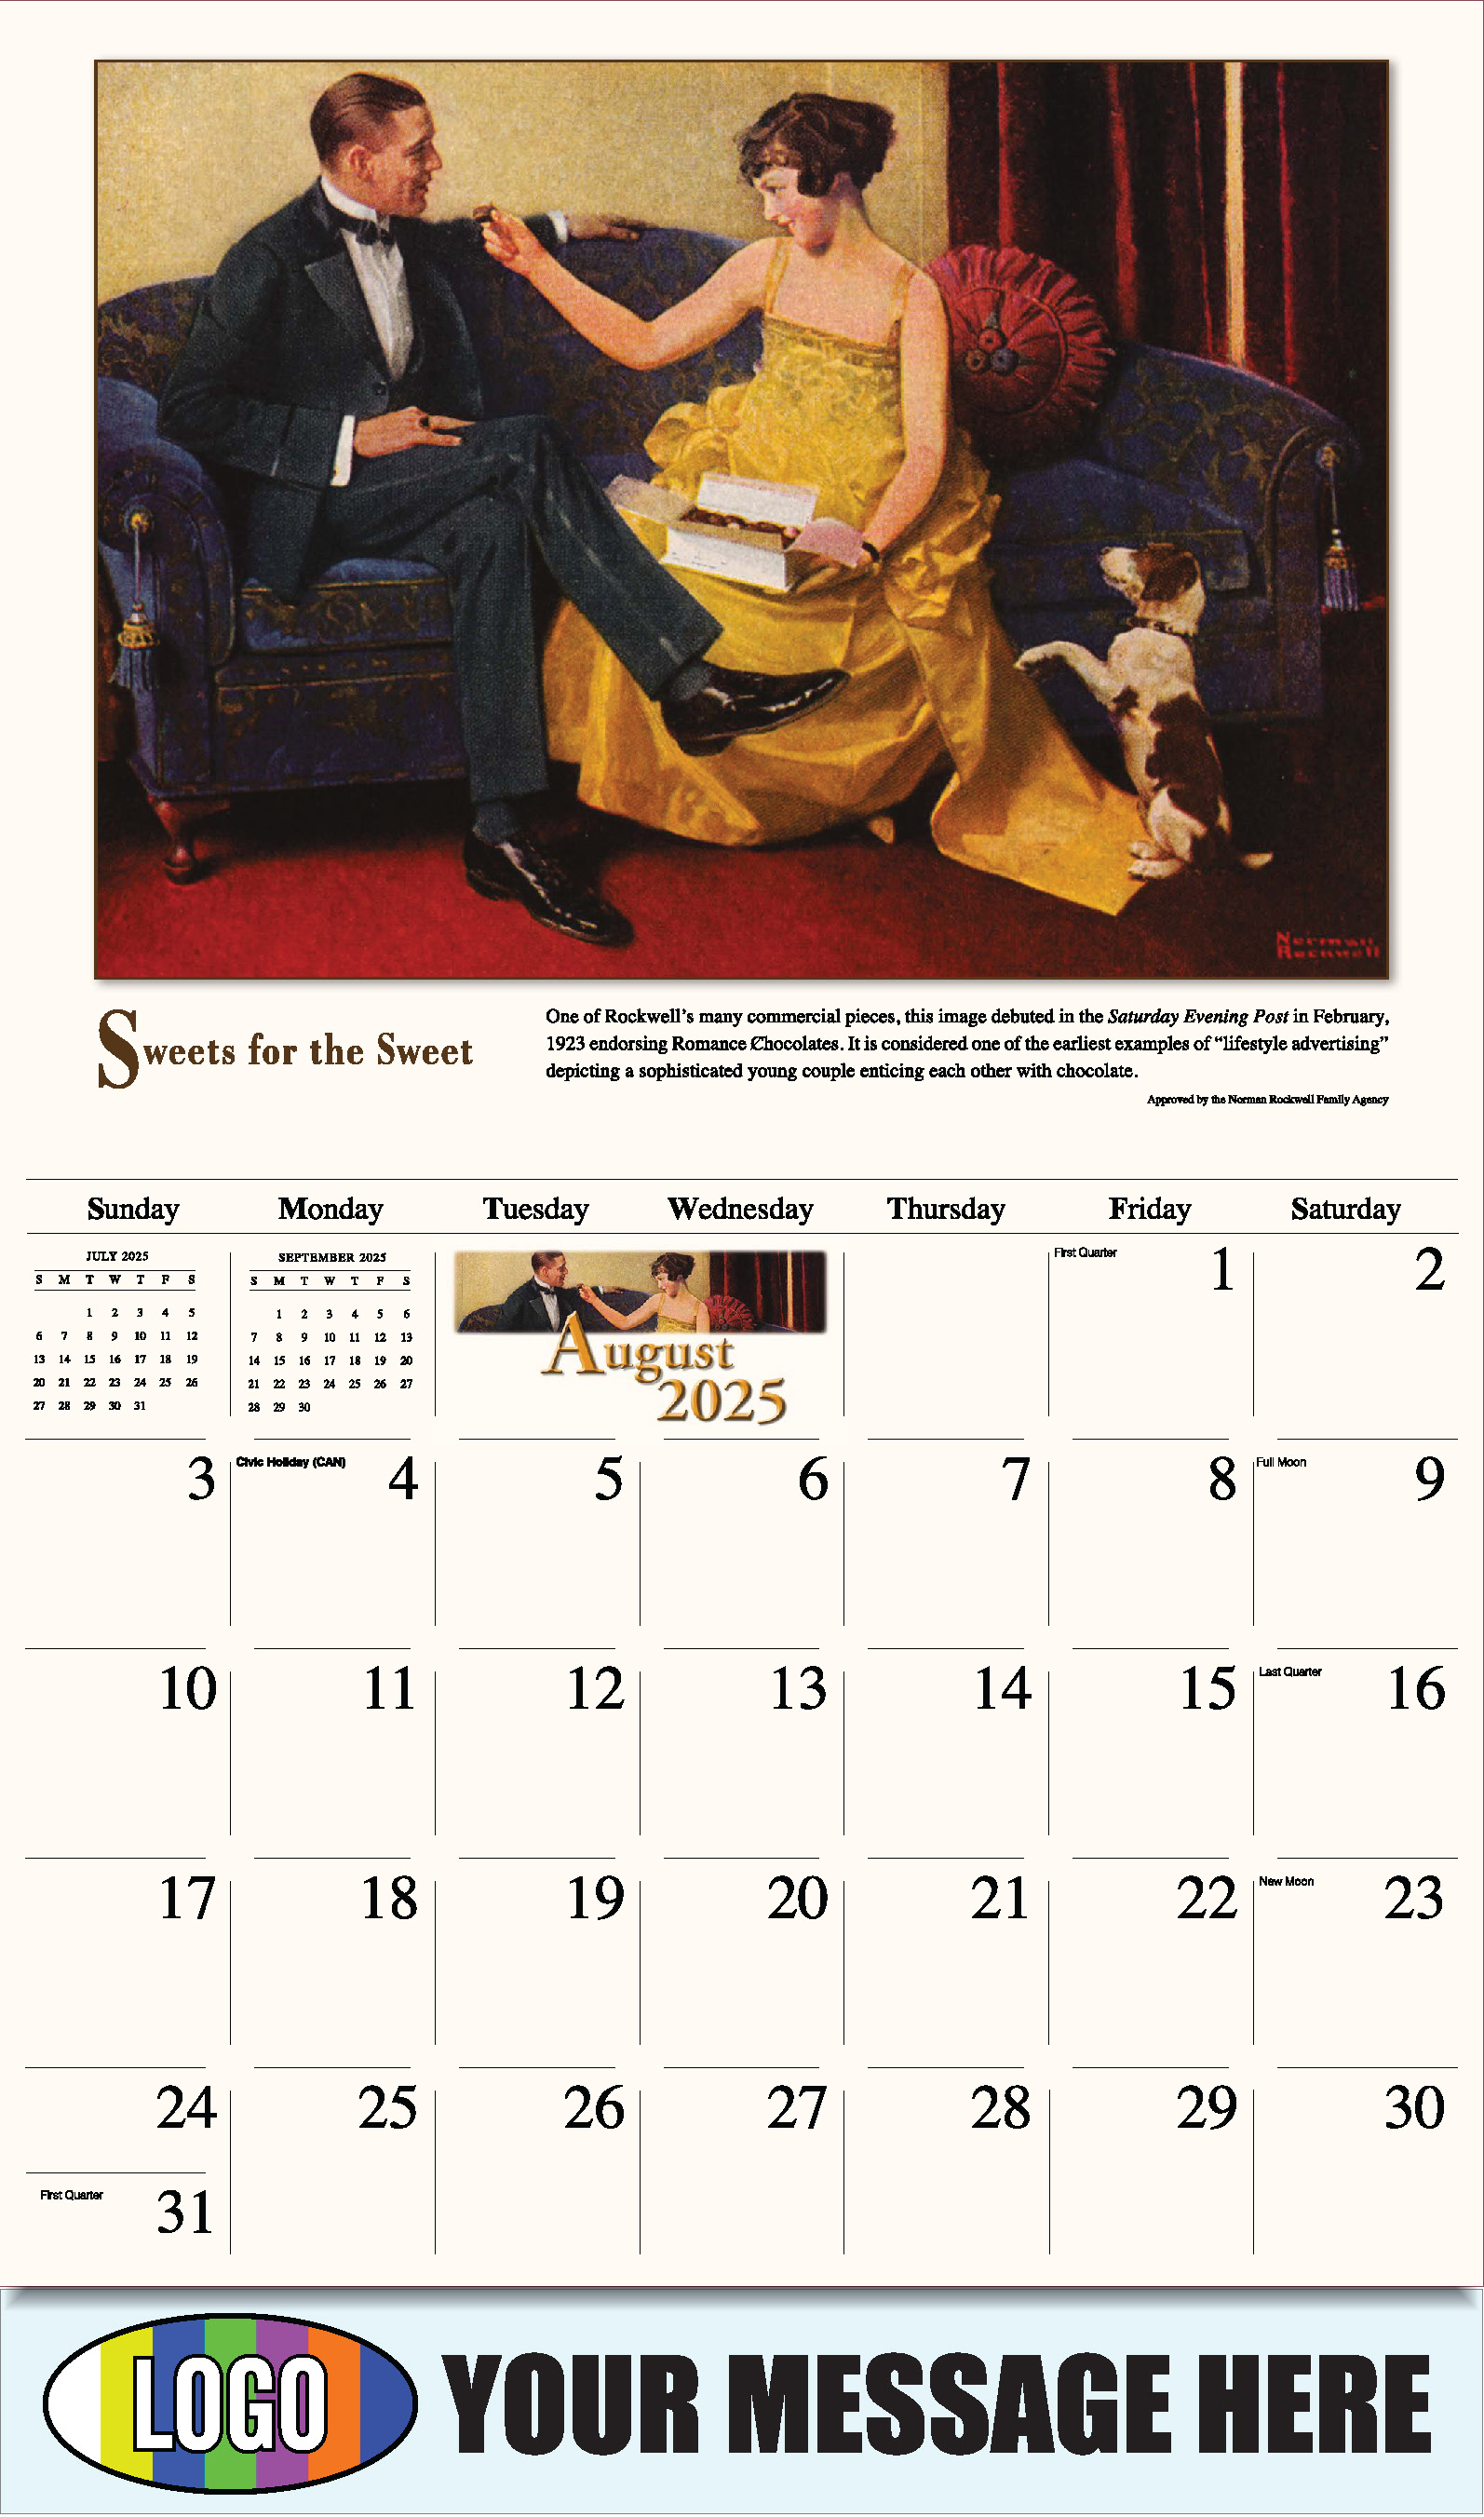 Memorable Images by Norman Rockwell 2025 Business Promotional Wall Calendar - August